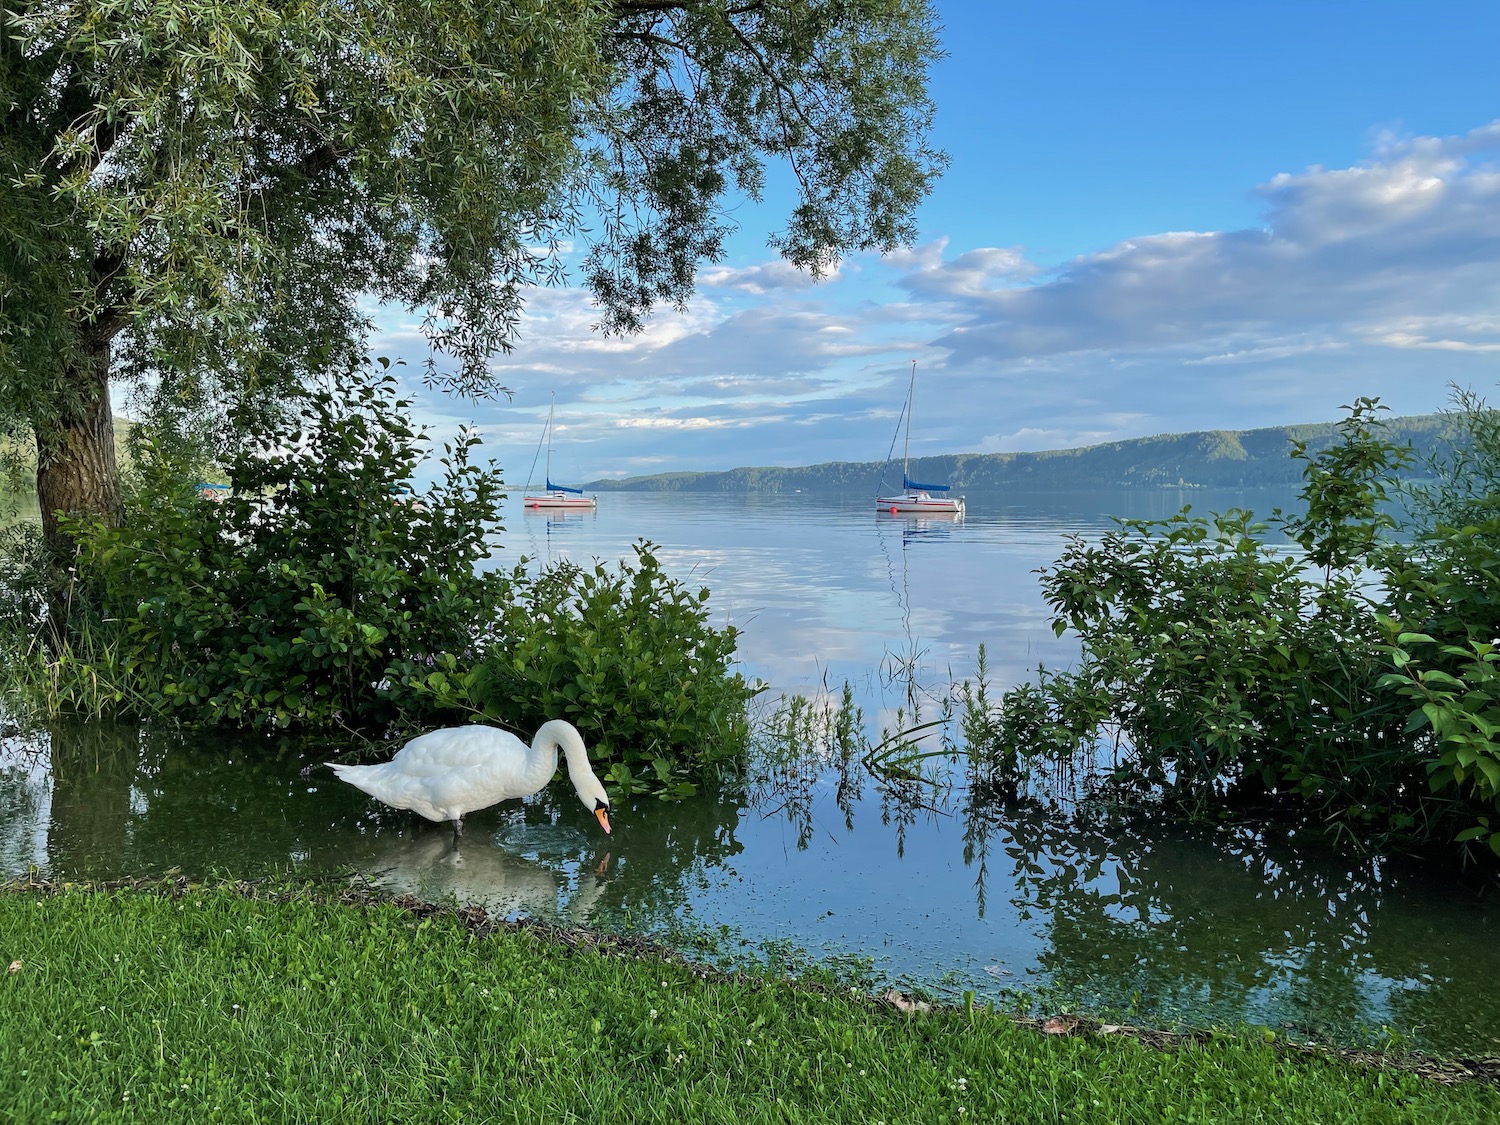 a white swan on the water